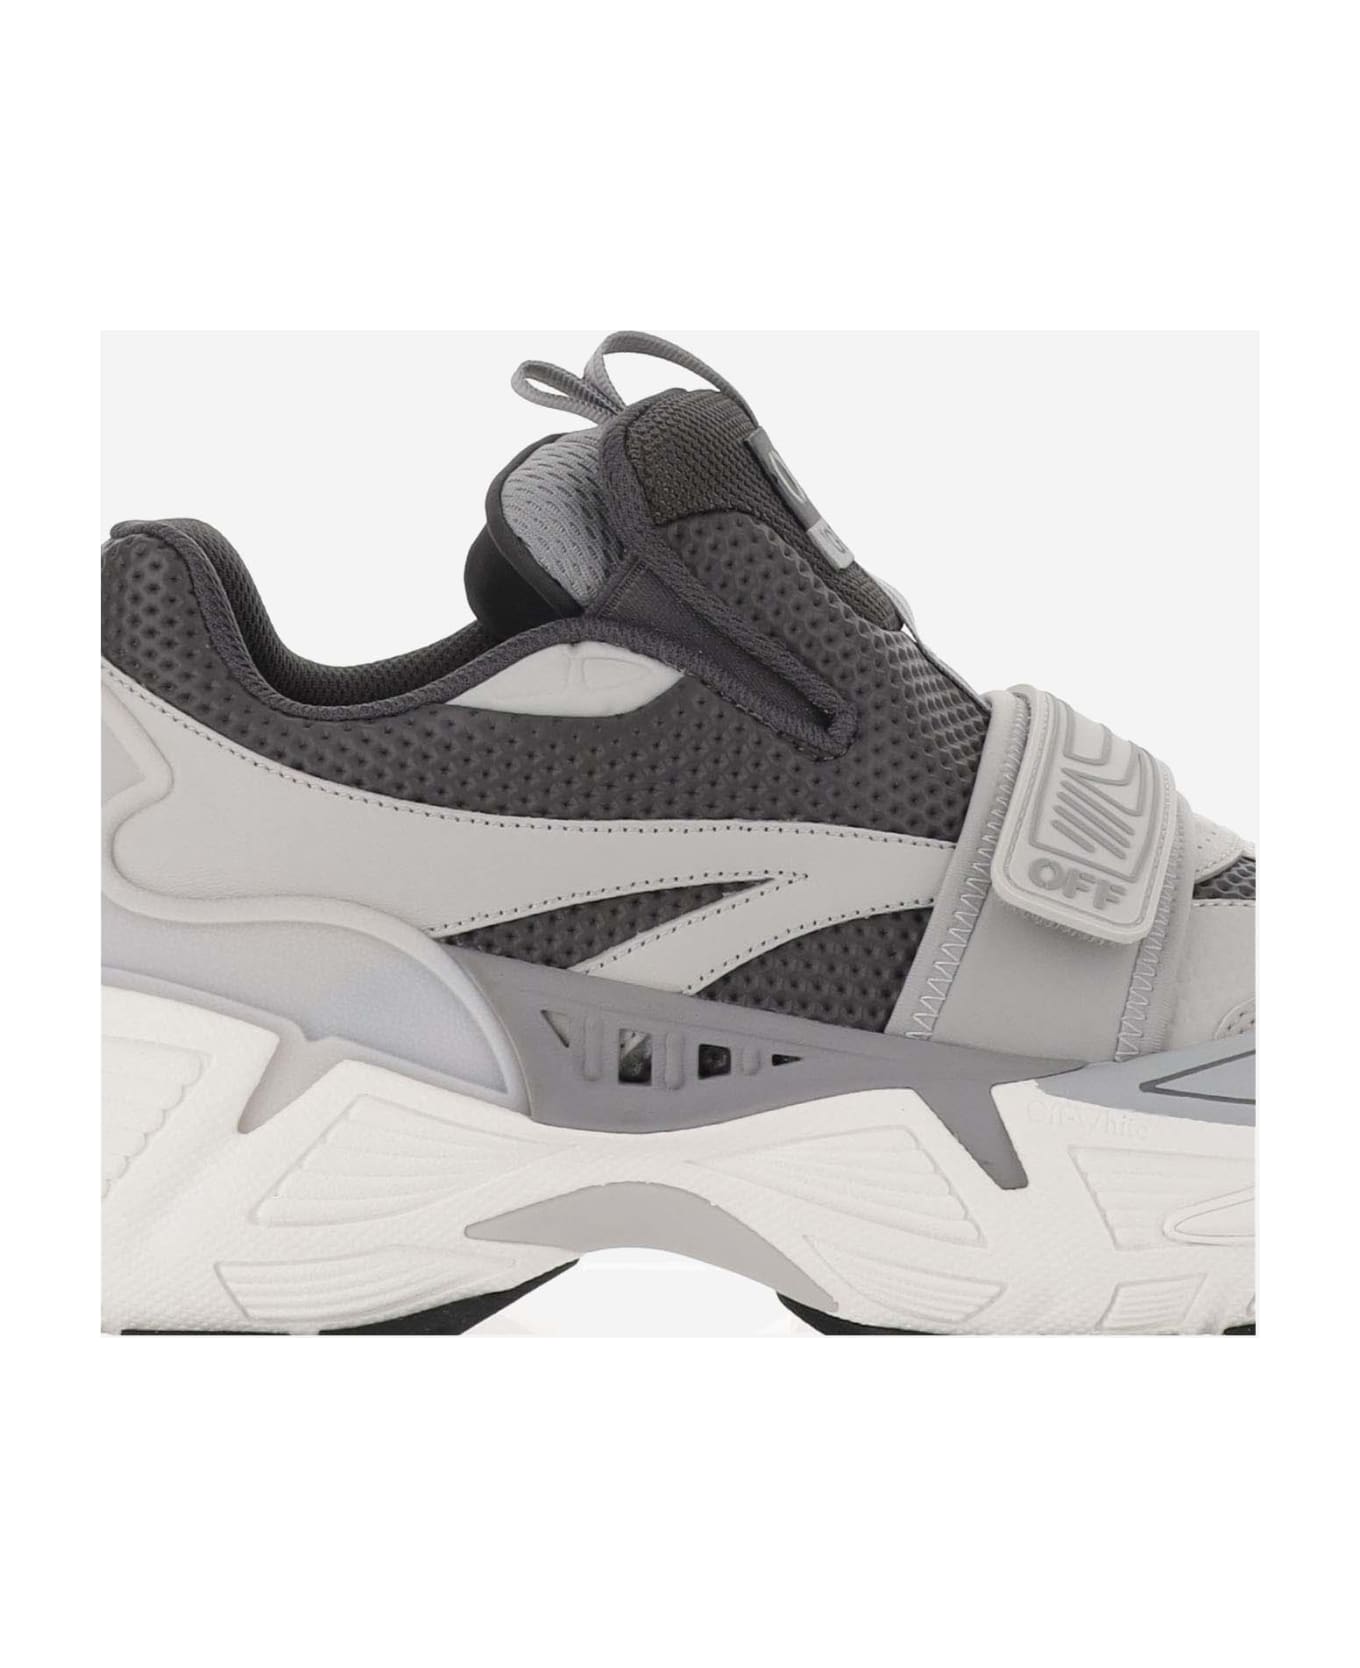 Off-White Glove Sneakers - LIGHT GREY